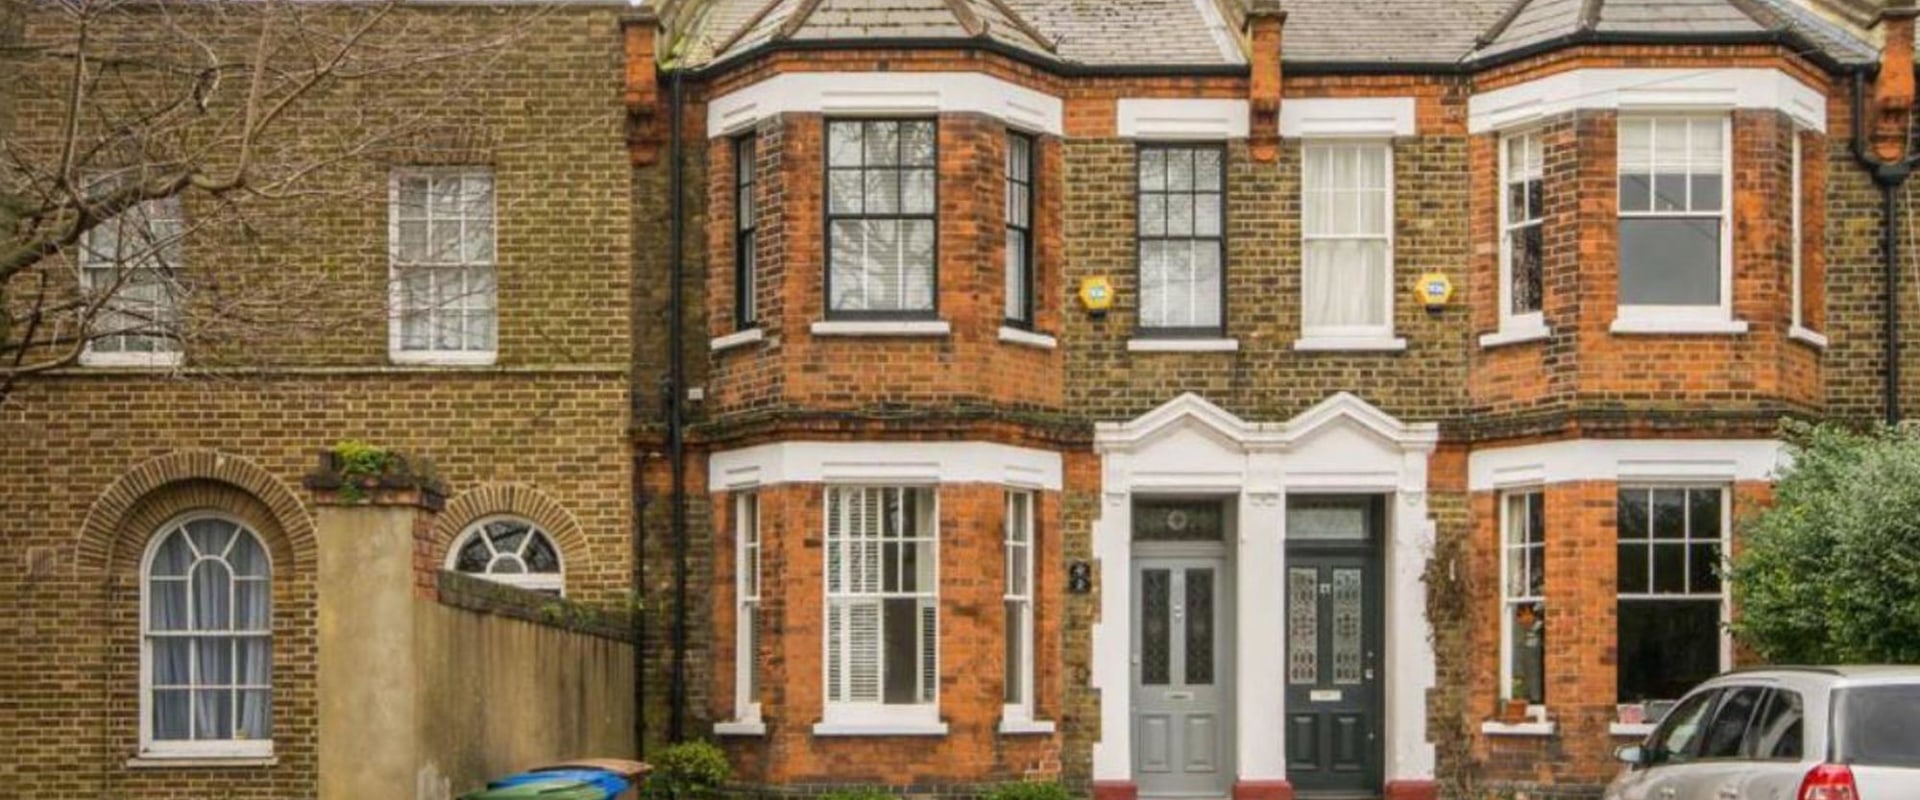 How Much Does it Cost to Buy a House in Central London?